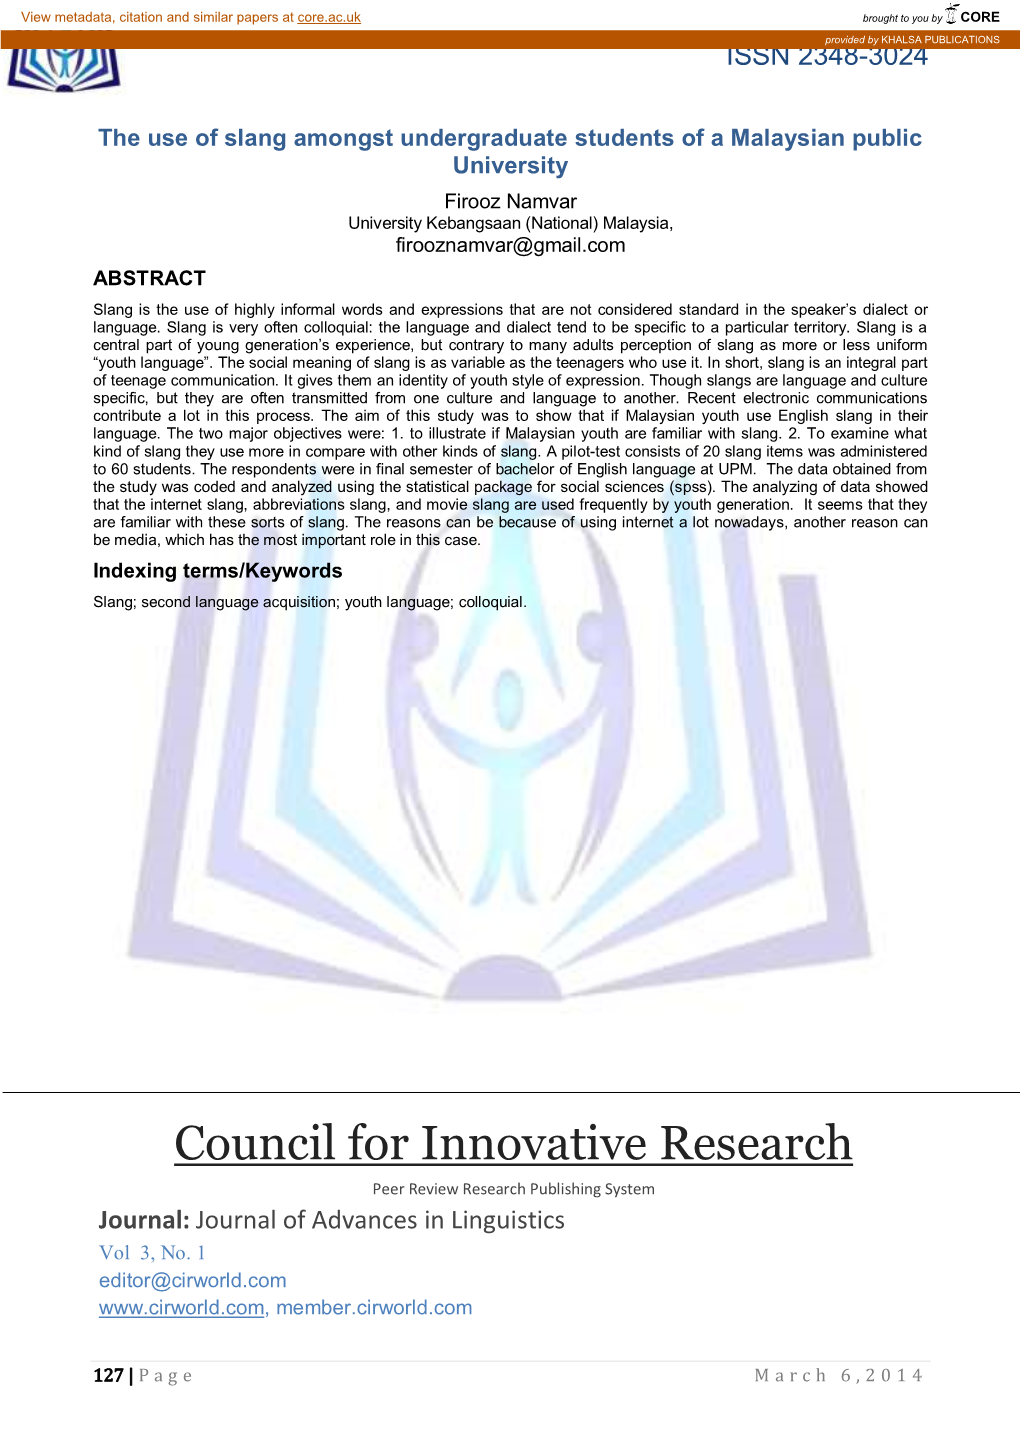 Council for Innovative Research